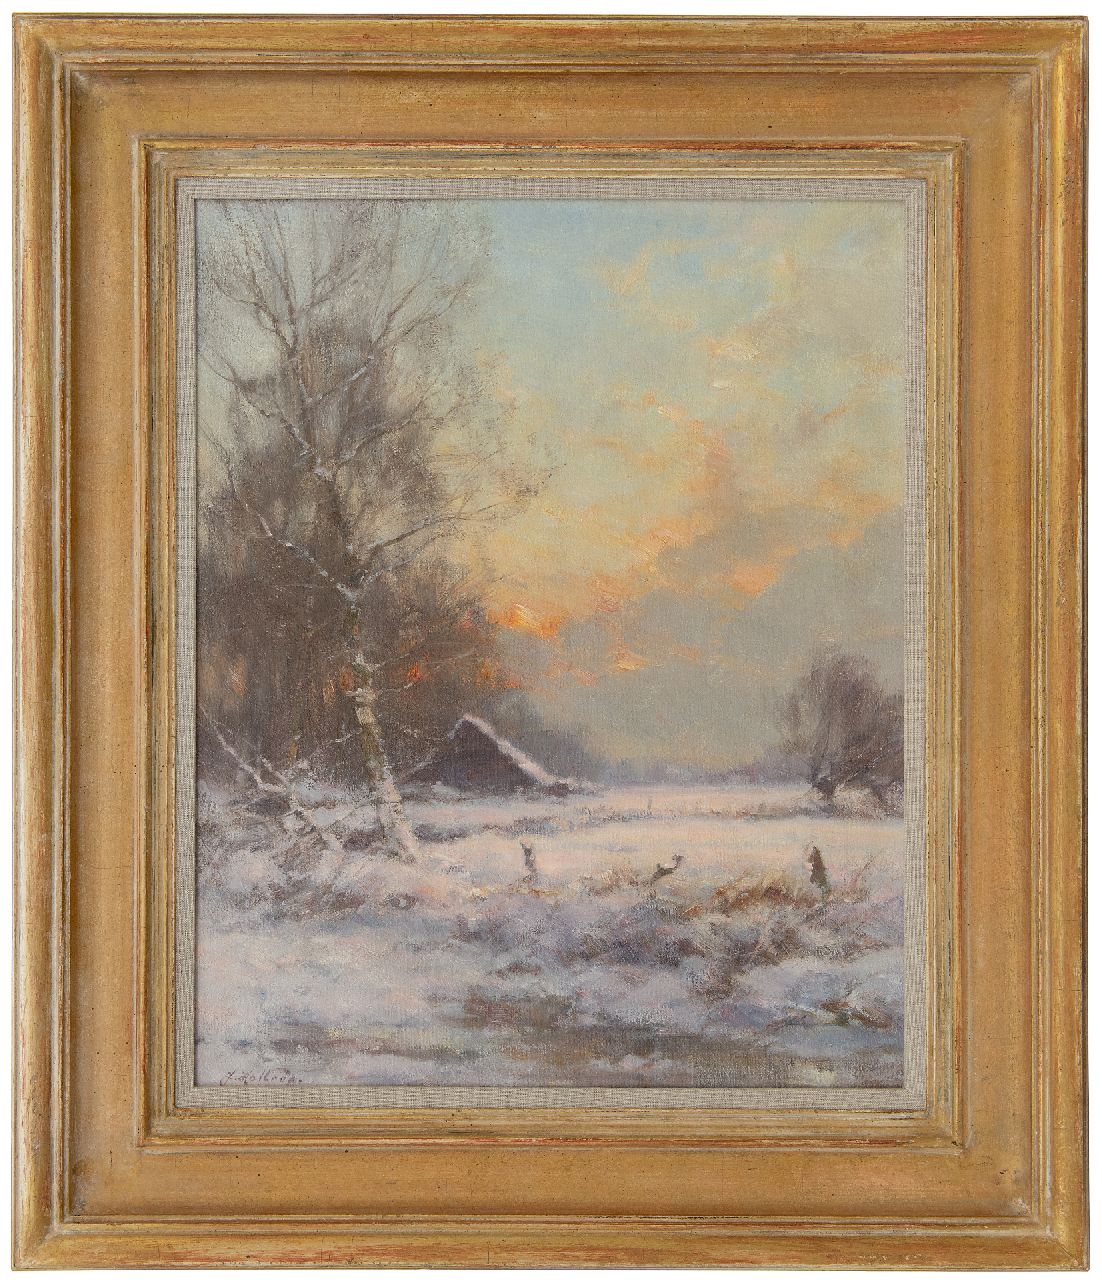 Holtrup J.  | Jan Holtrup | Paintings offered for sale | Snowy landscape, oil on canvas 50.3 x 40.3 cm, signed l.l.